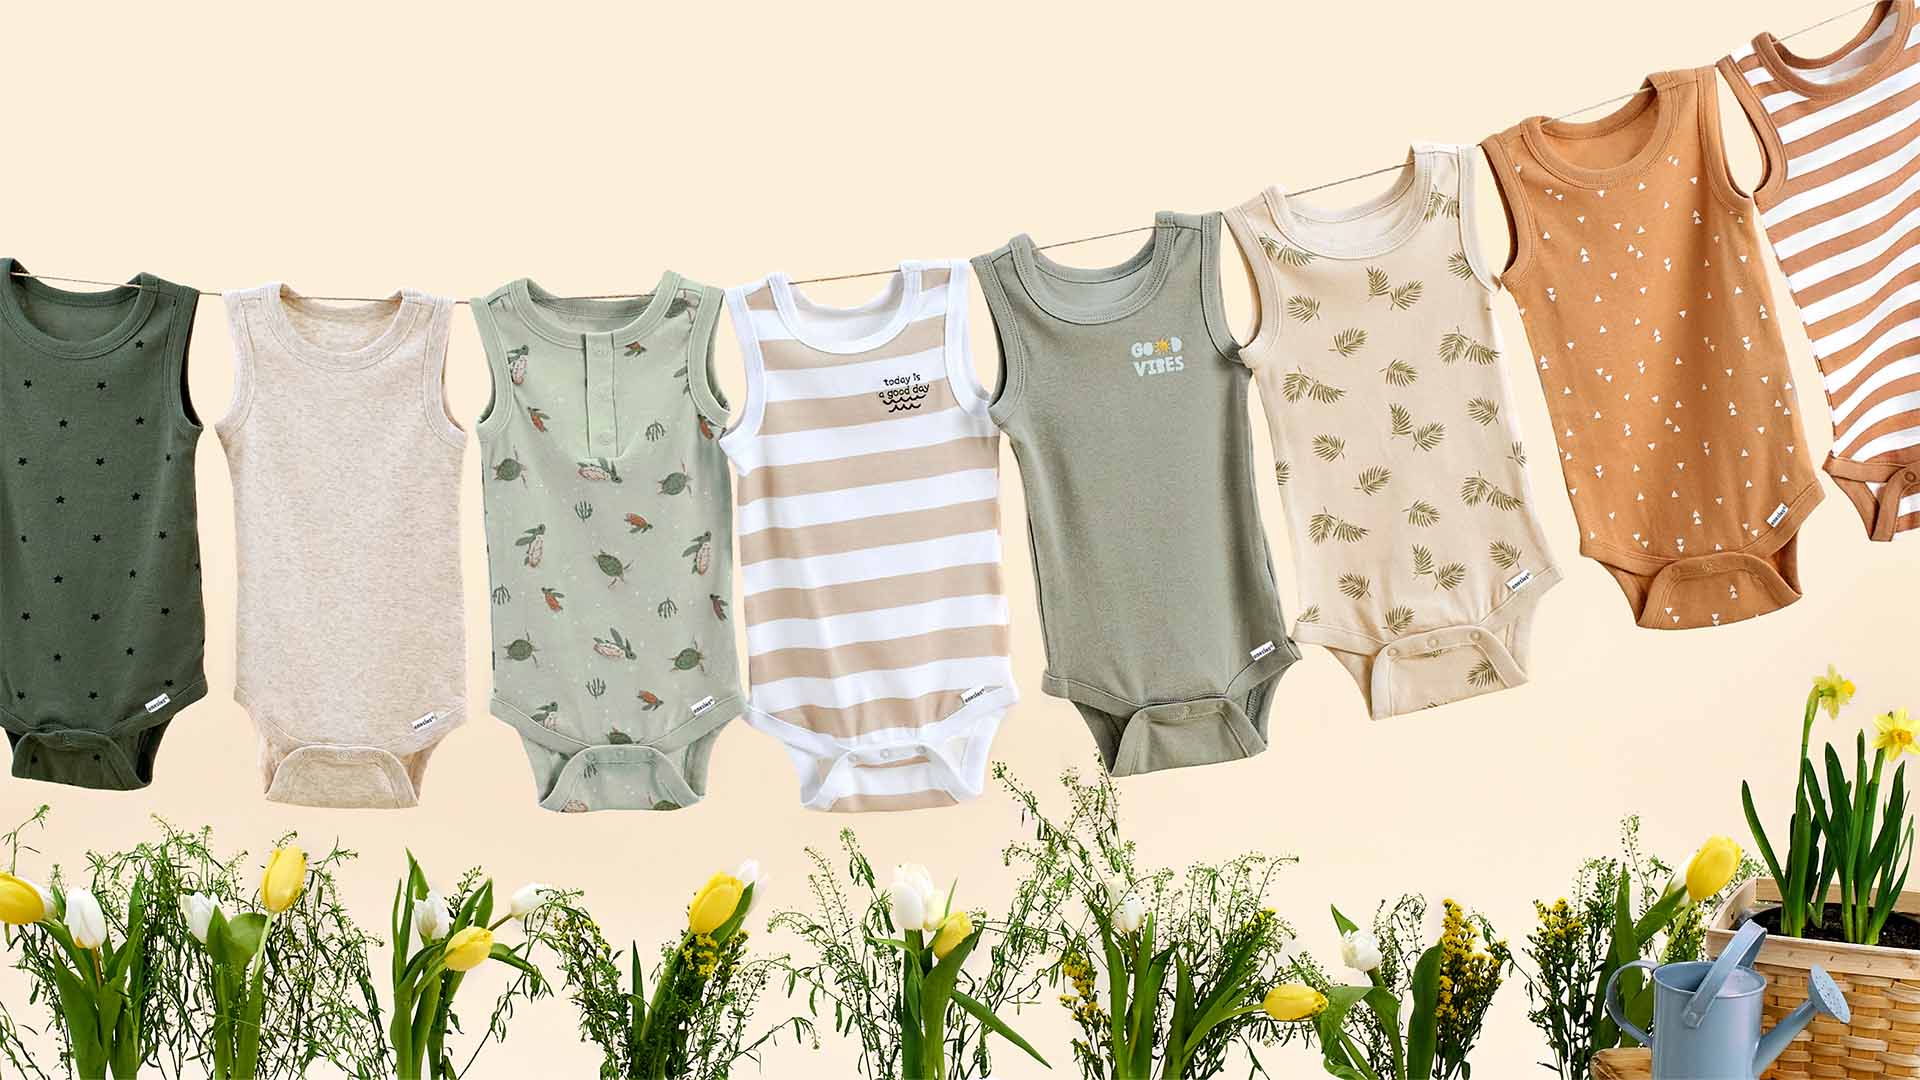 Shop Baby Boy Clothes  Onesies®, Pajamas, Outfit Sets & More – Gerber  Childrenswear